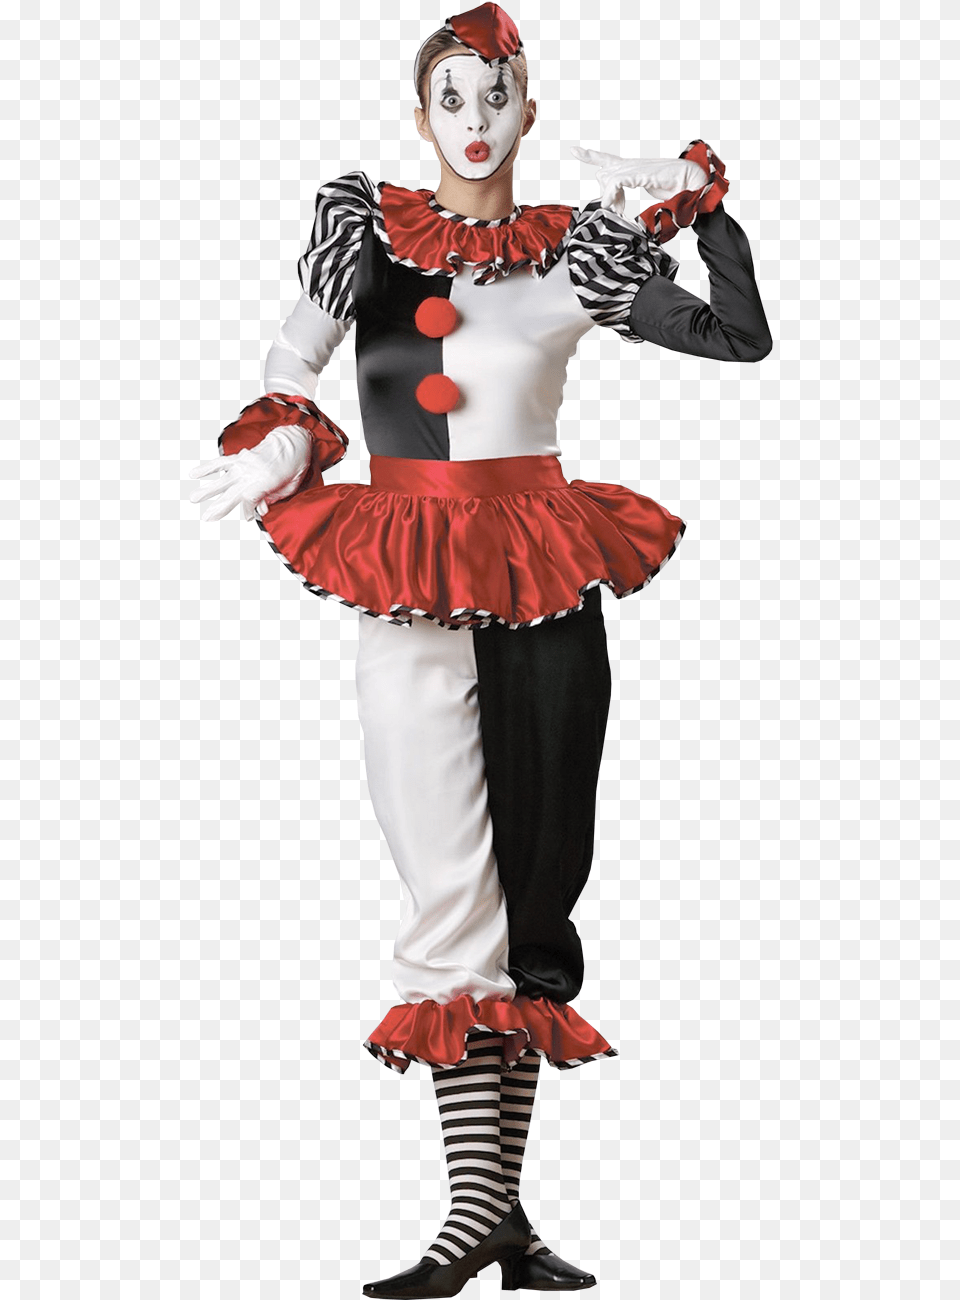 Download Clown For Free Harlequin Clown, Clothing, Costume, Person, Adult Png Image